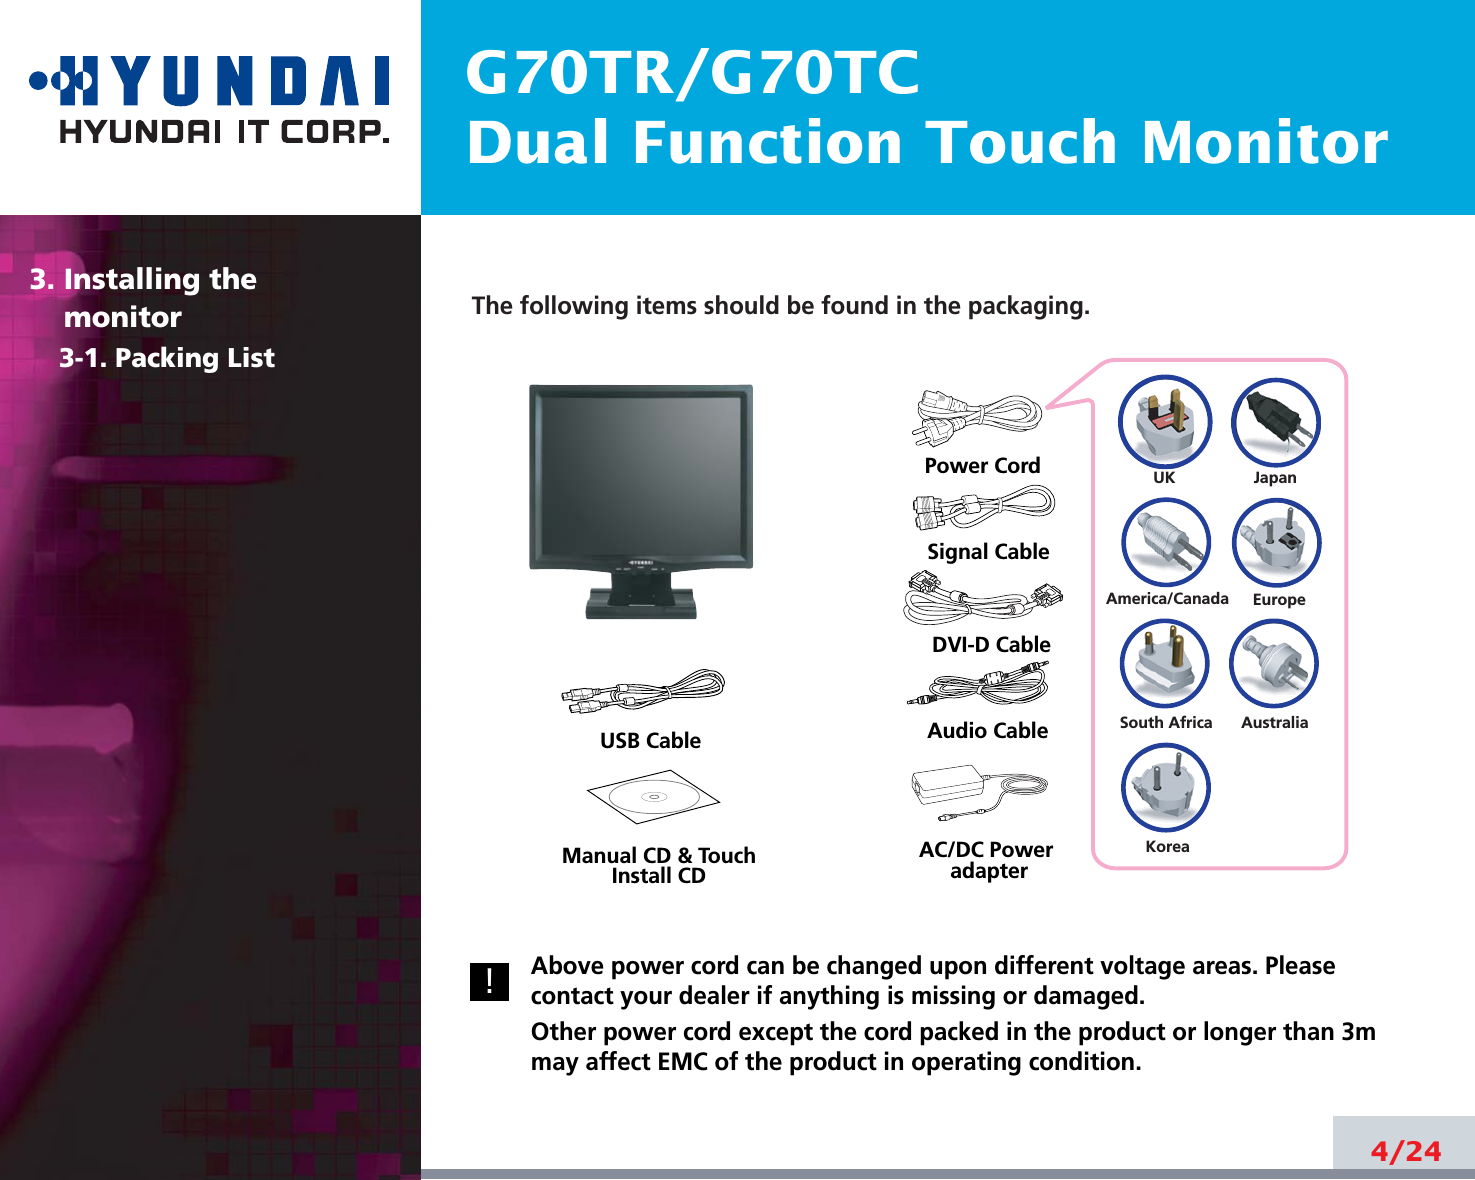 G70TR/G70TCDual Function Touch Monitor4/24The following items should be found in the packaging.Above power cord can be changed upon different voltage areas. Pleasecontact your dealer if anything is missing or damaged.Other power cord except the cord packed in the product or longer than 3mmay affect EMC of the product in operating condition.3. Installing the monitor3-1. Packing List!UKAmerica/CanadaJapanAustraliaKoreaEuropeSouth AfricaPower CordSignal CableAudio CableDVI-D CableUSB CableAC/DC PoweradapterManual CD &amp; TouchInstall CD